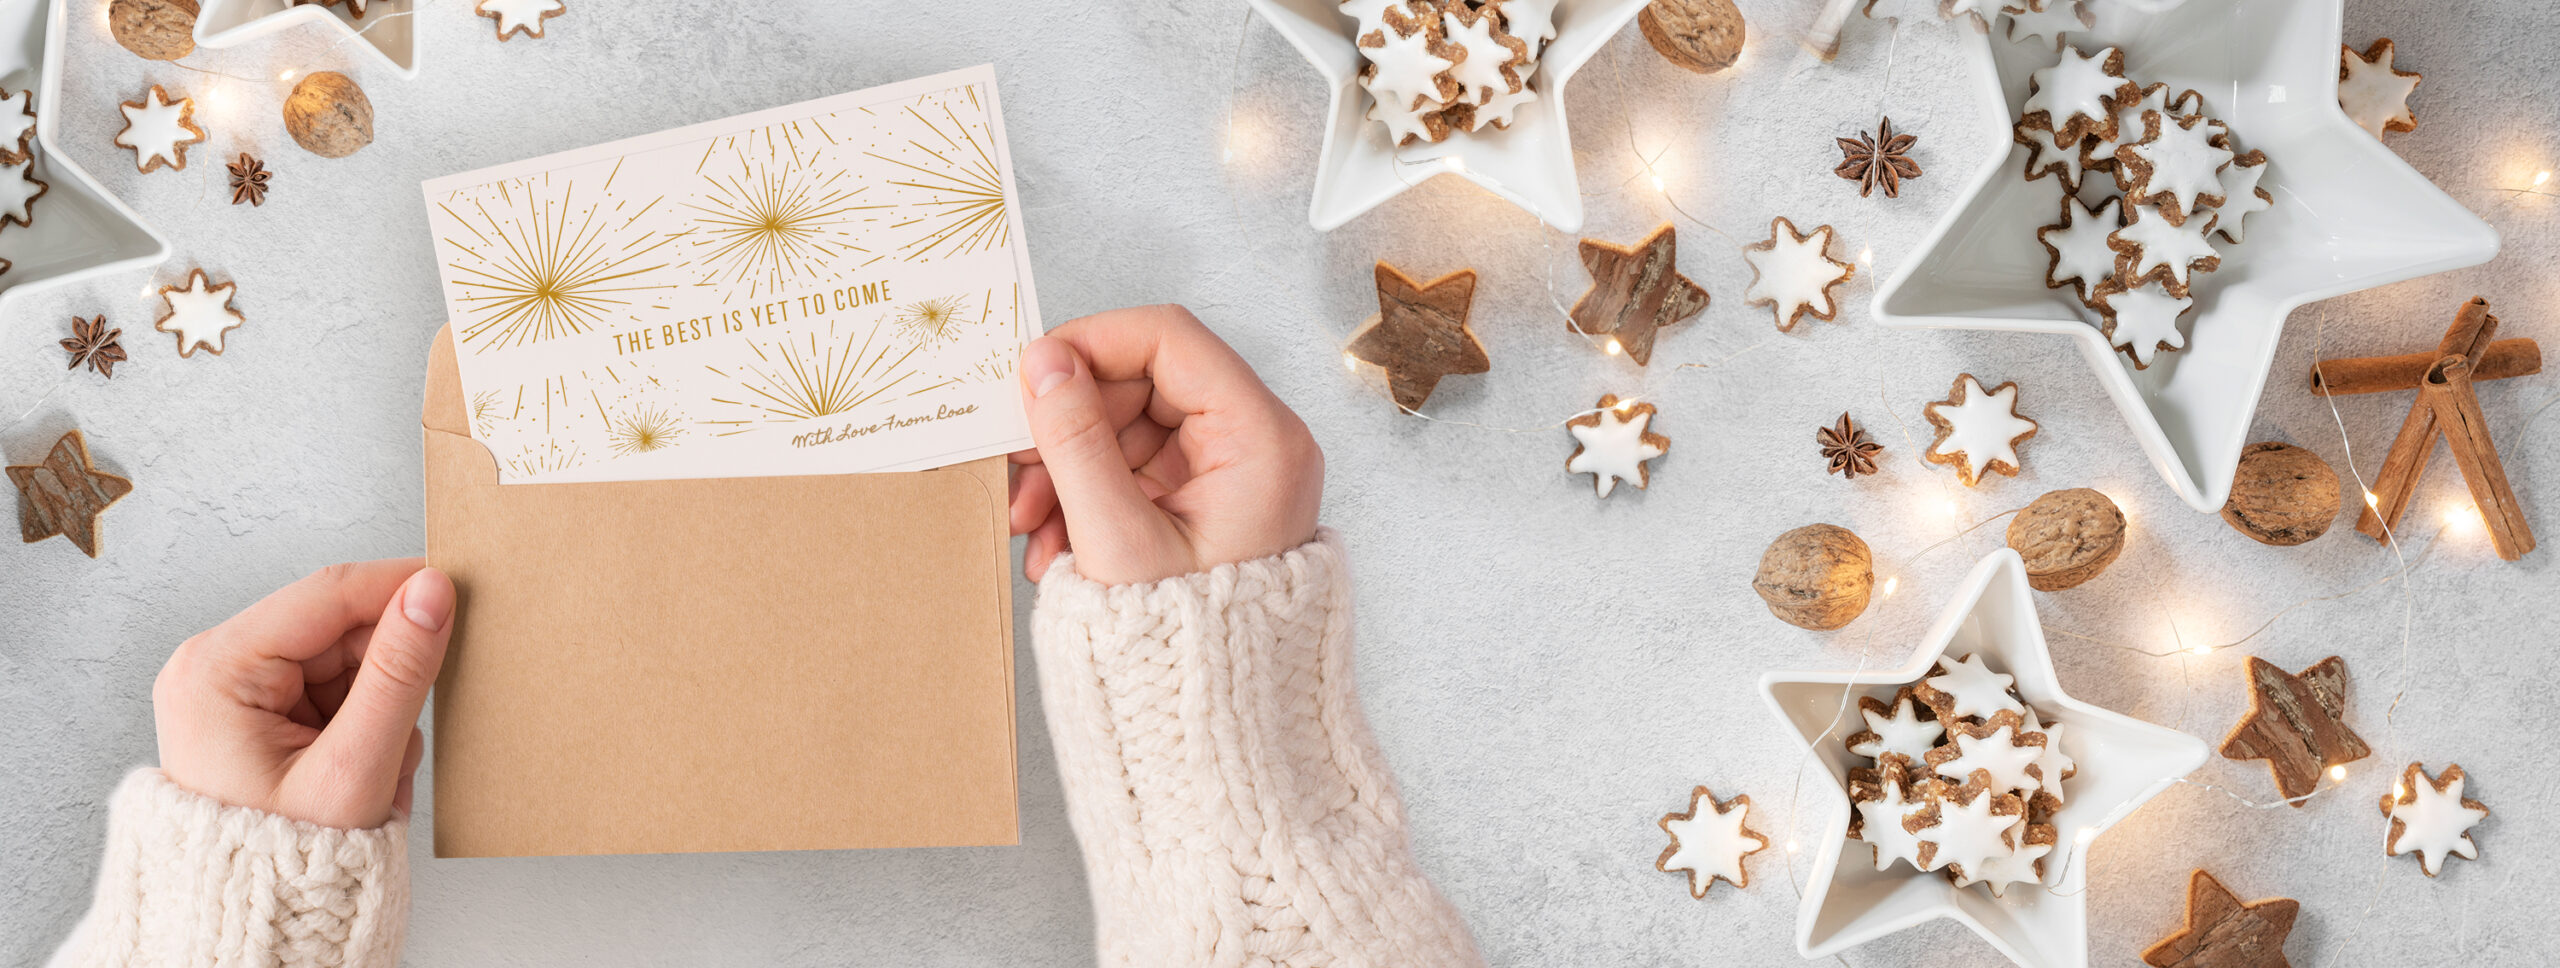 6 Quick Christmas Card Ideas That Will Spread Joy - Avery